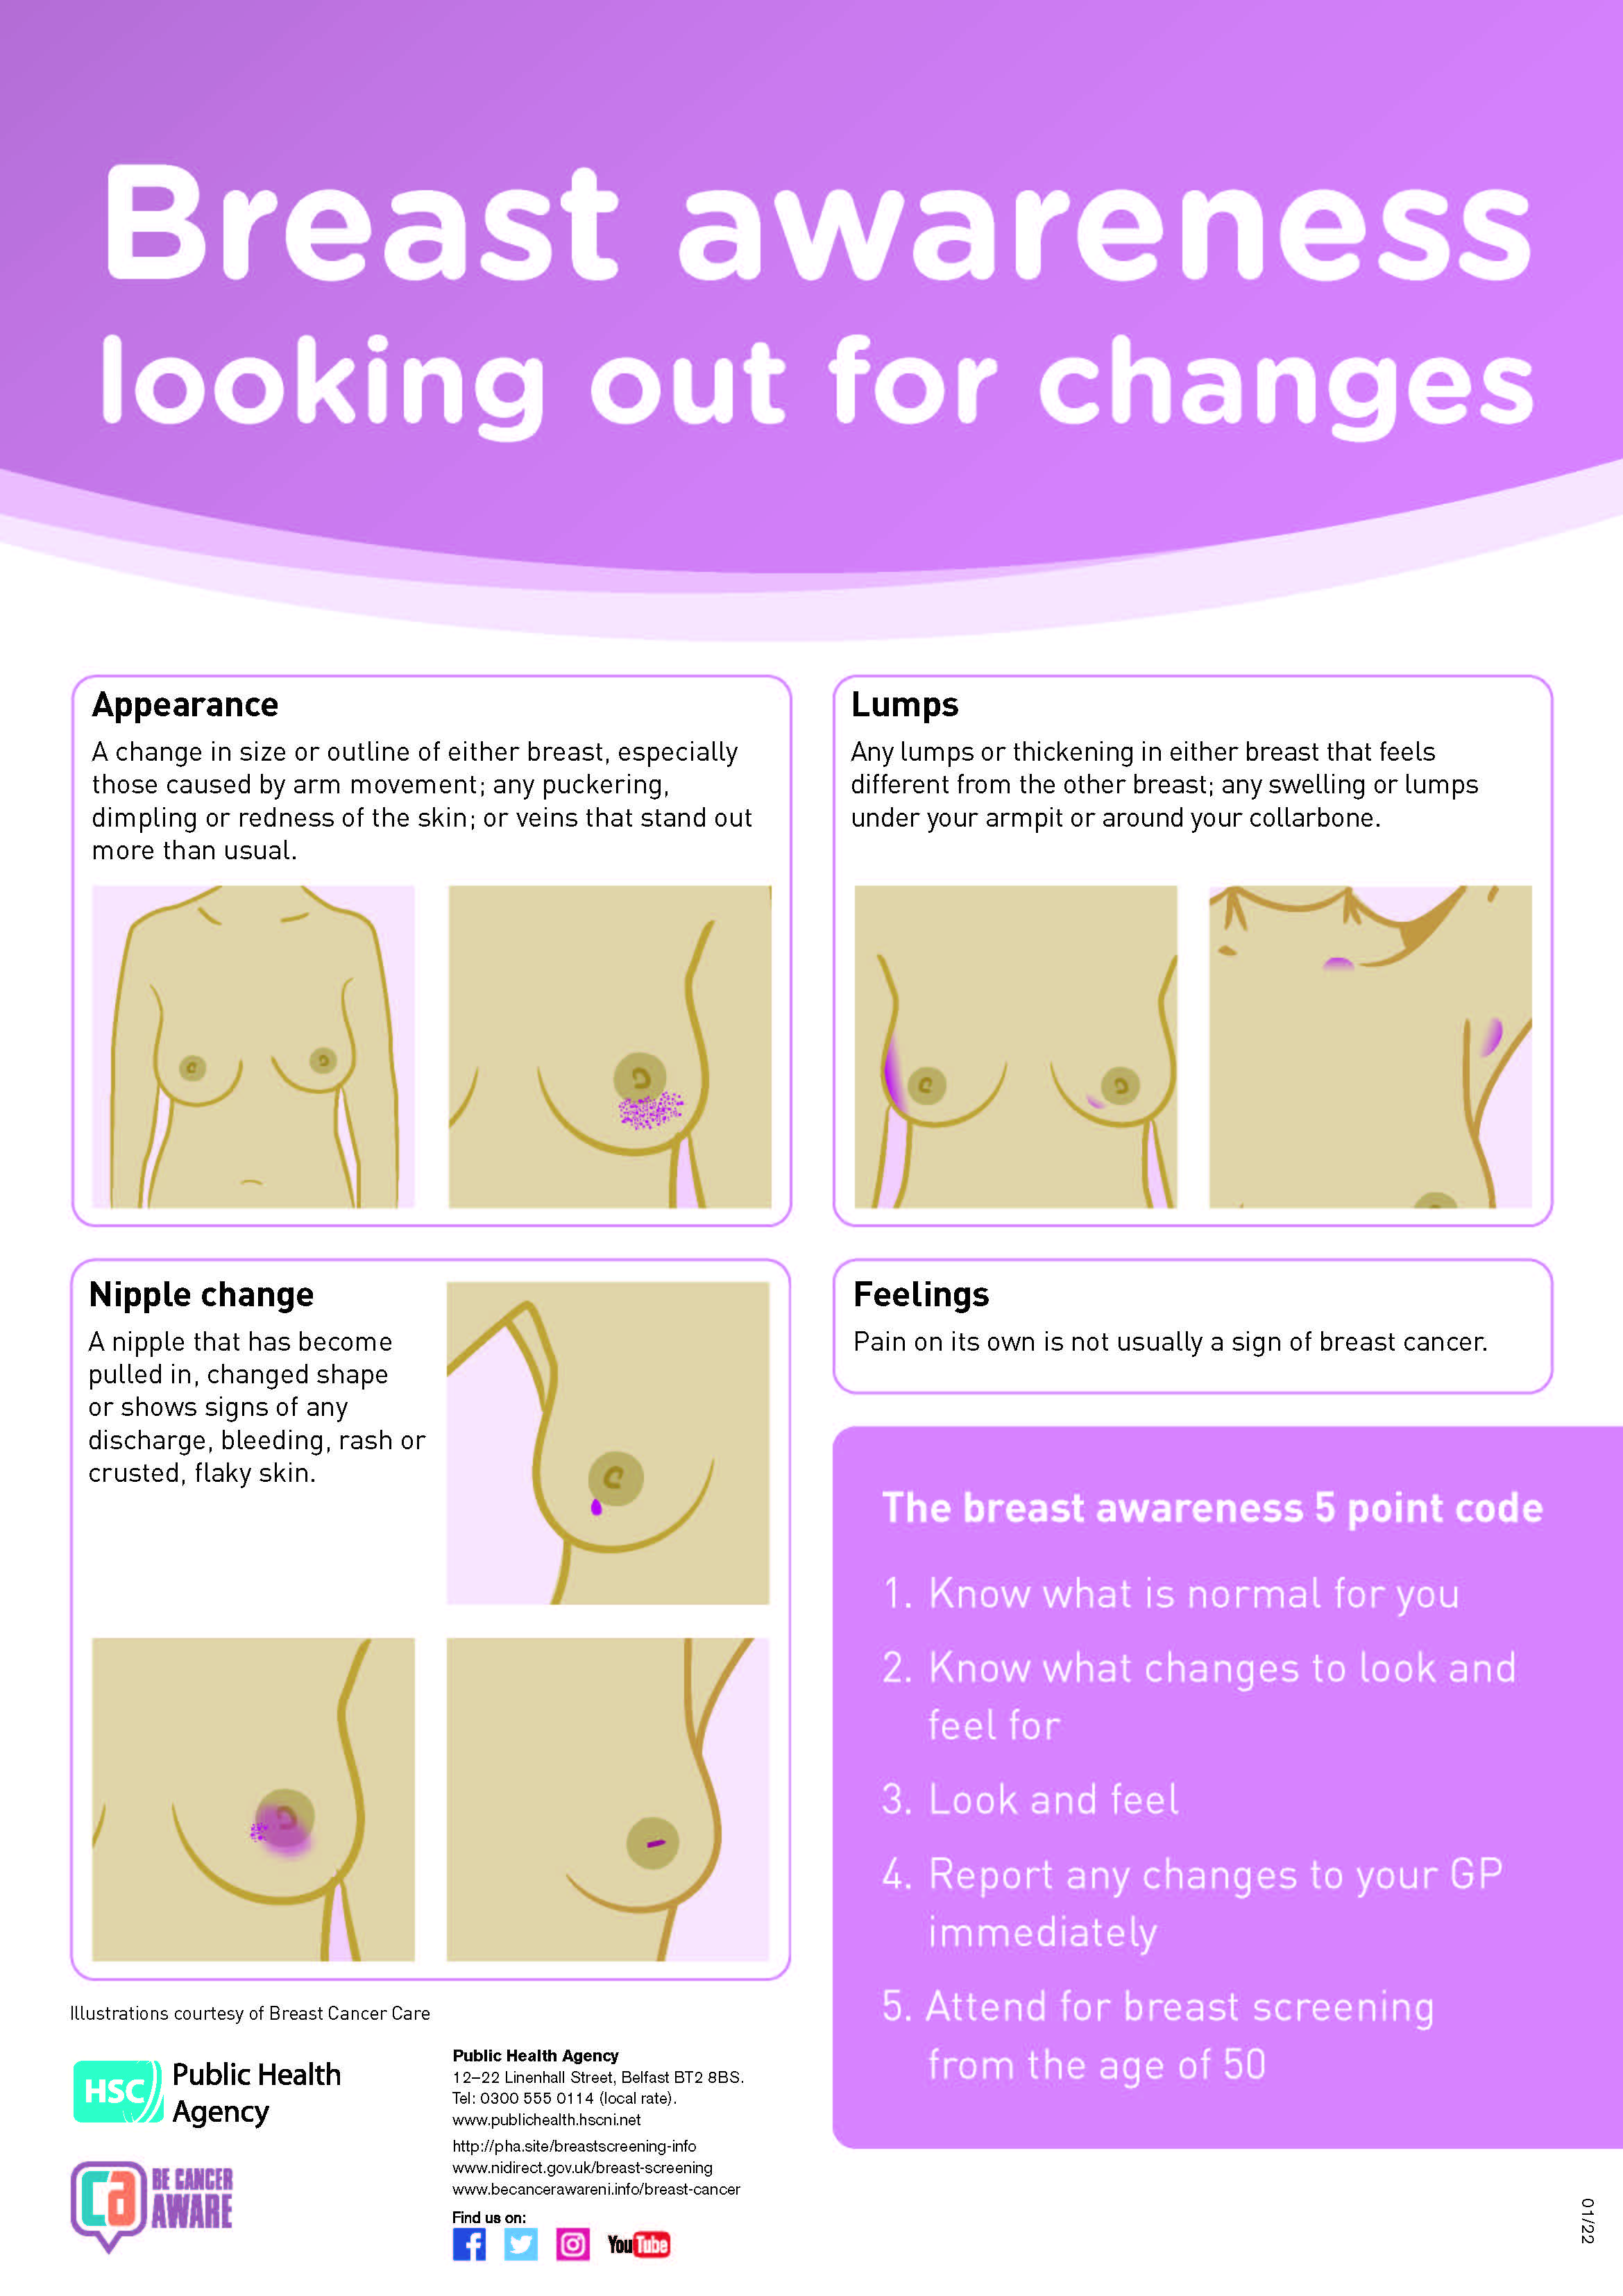 Breast awareness - looking out for changes poster image